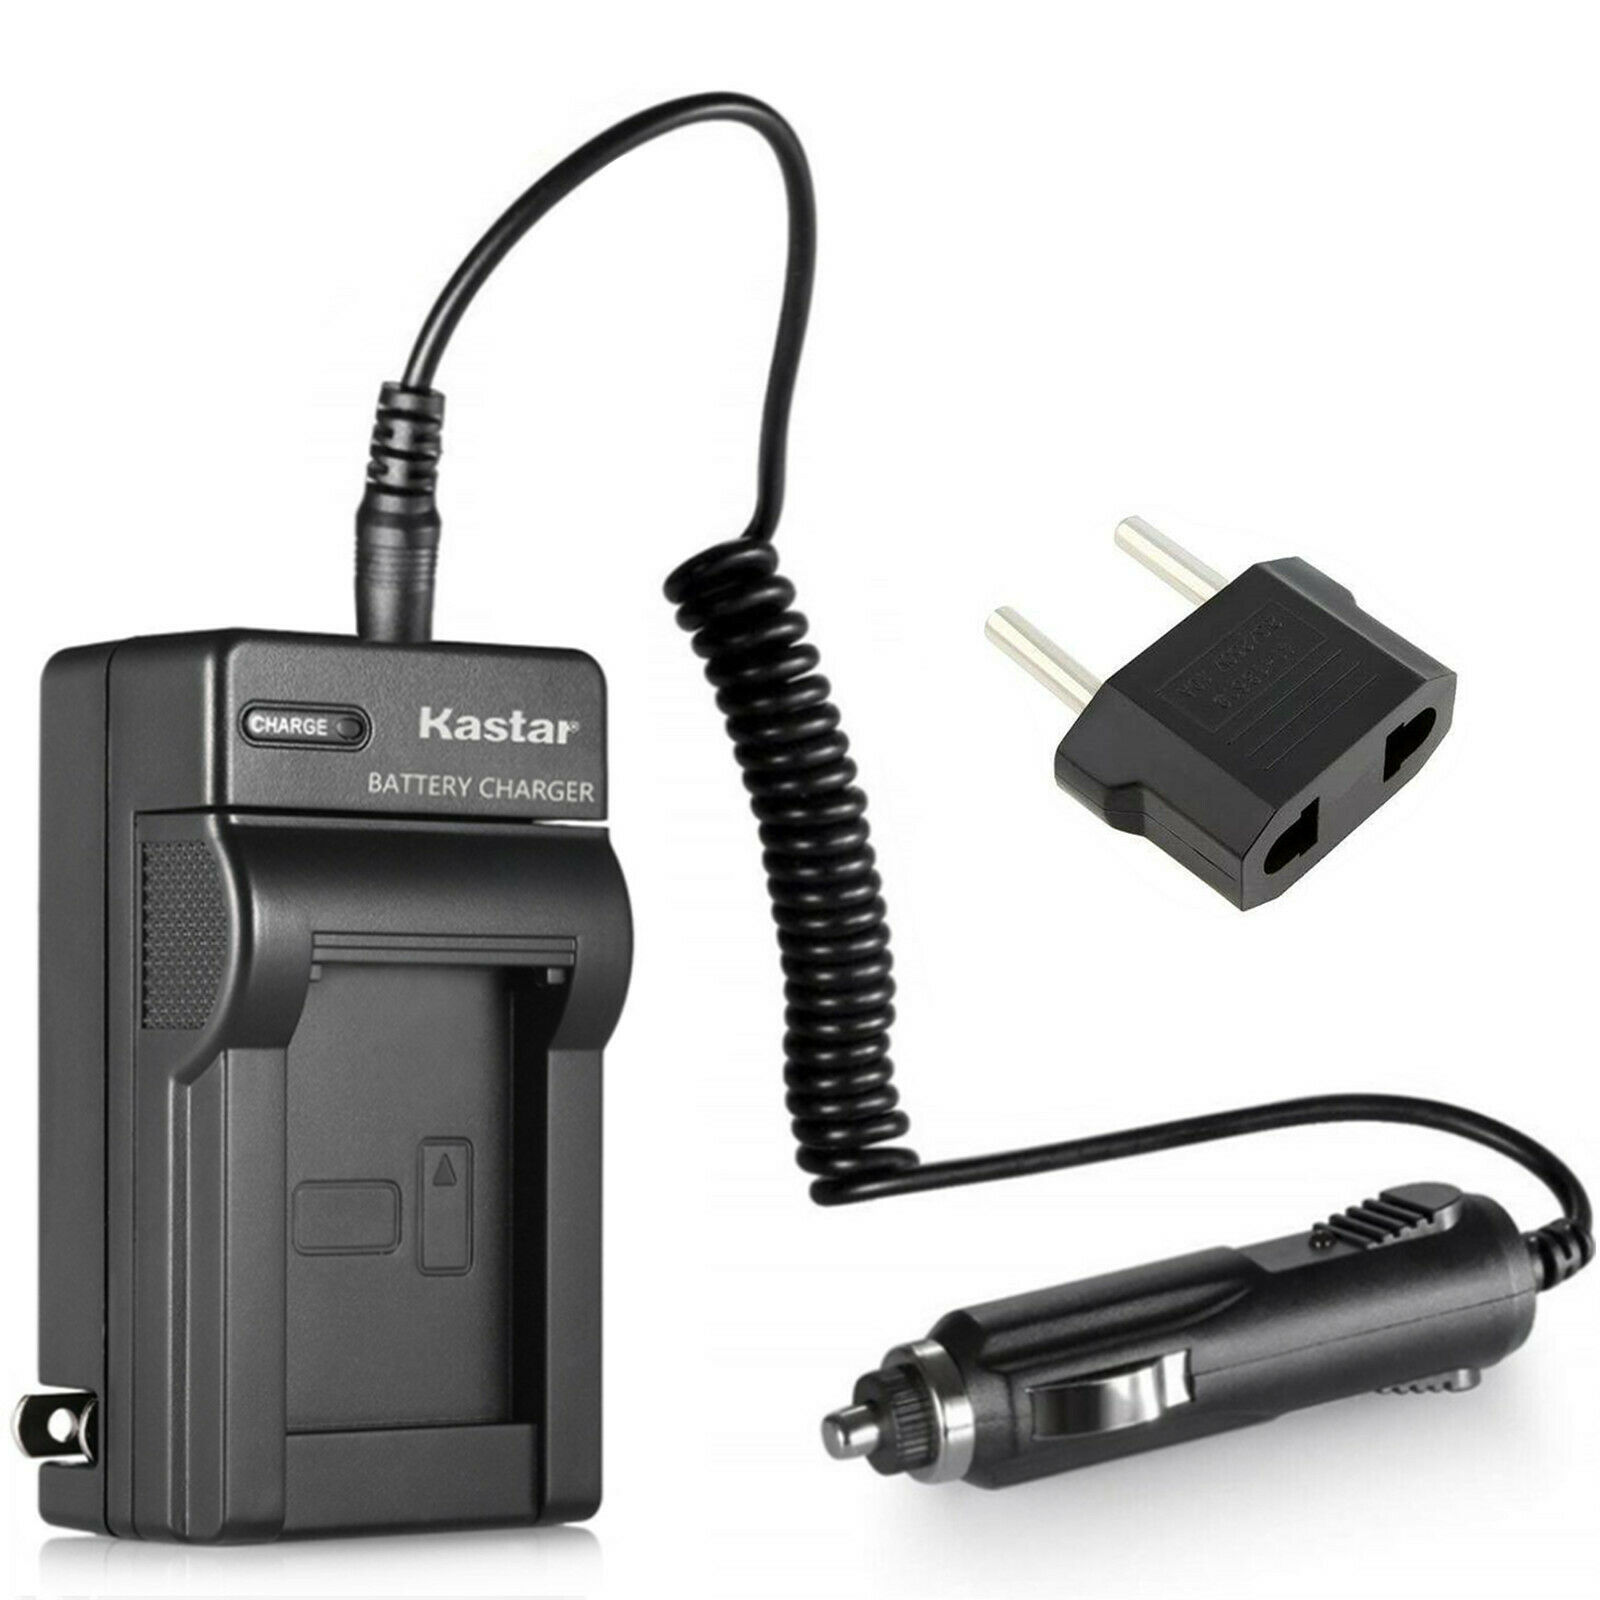 OLYMPUS MINI DIGITAL S battery charger